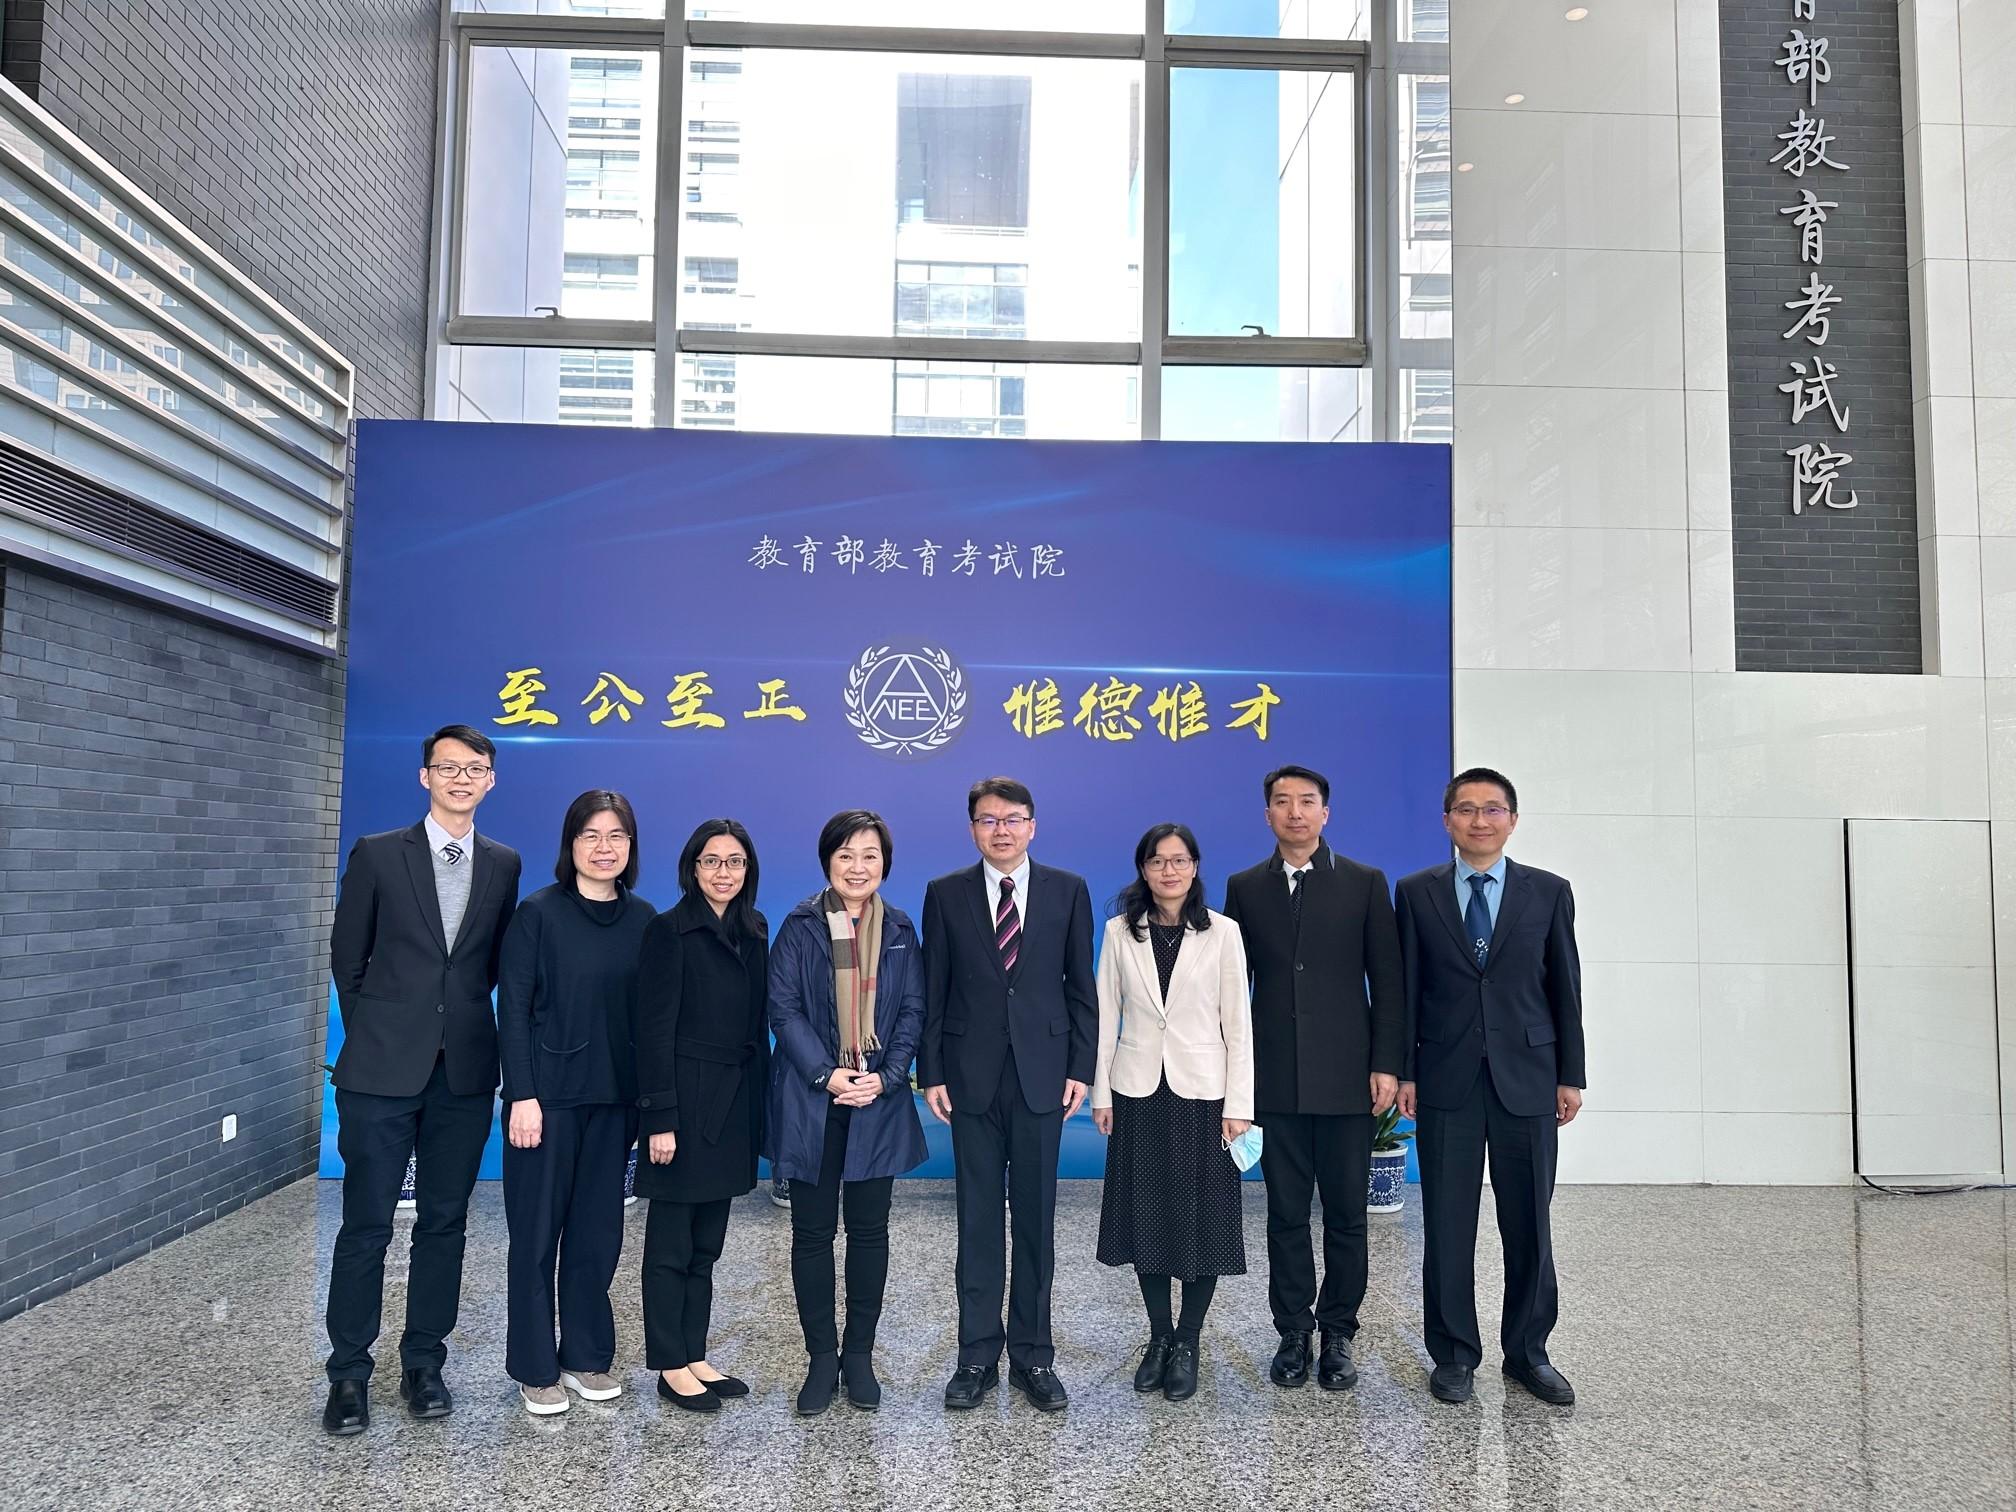 The Secretary for Education, Dr Choi Yuk-lin, yesterday (March 15) visited the National Education Examinations Authority in Beijing to learn about its work related to the organisation of Mainland and international examinations on the Mainland. Photo shows Dr Choi (fourth left) and the Vice President of the National Education Examinations Authority, Mr Yu Han (fourth right). 